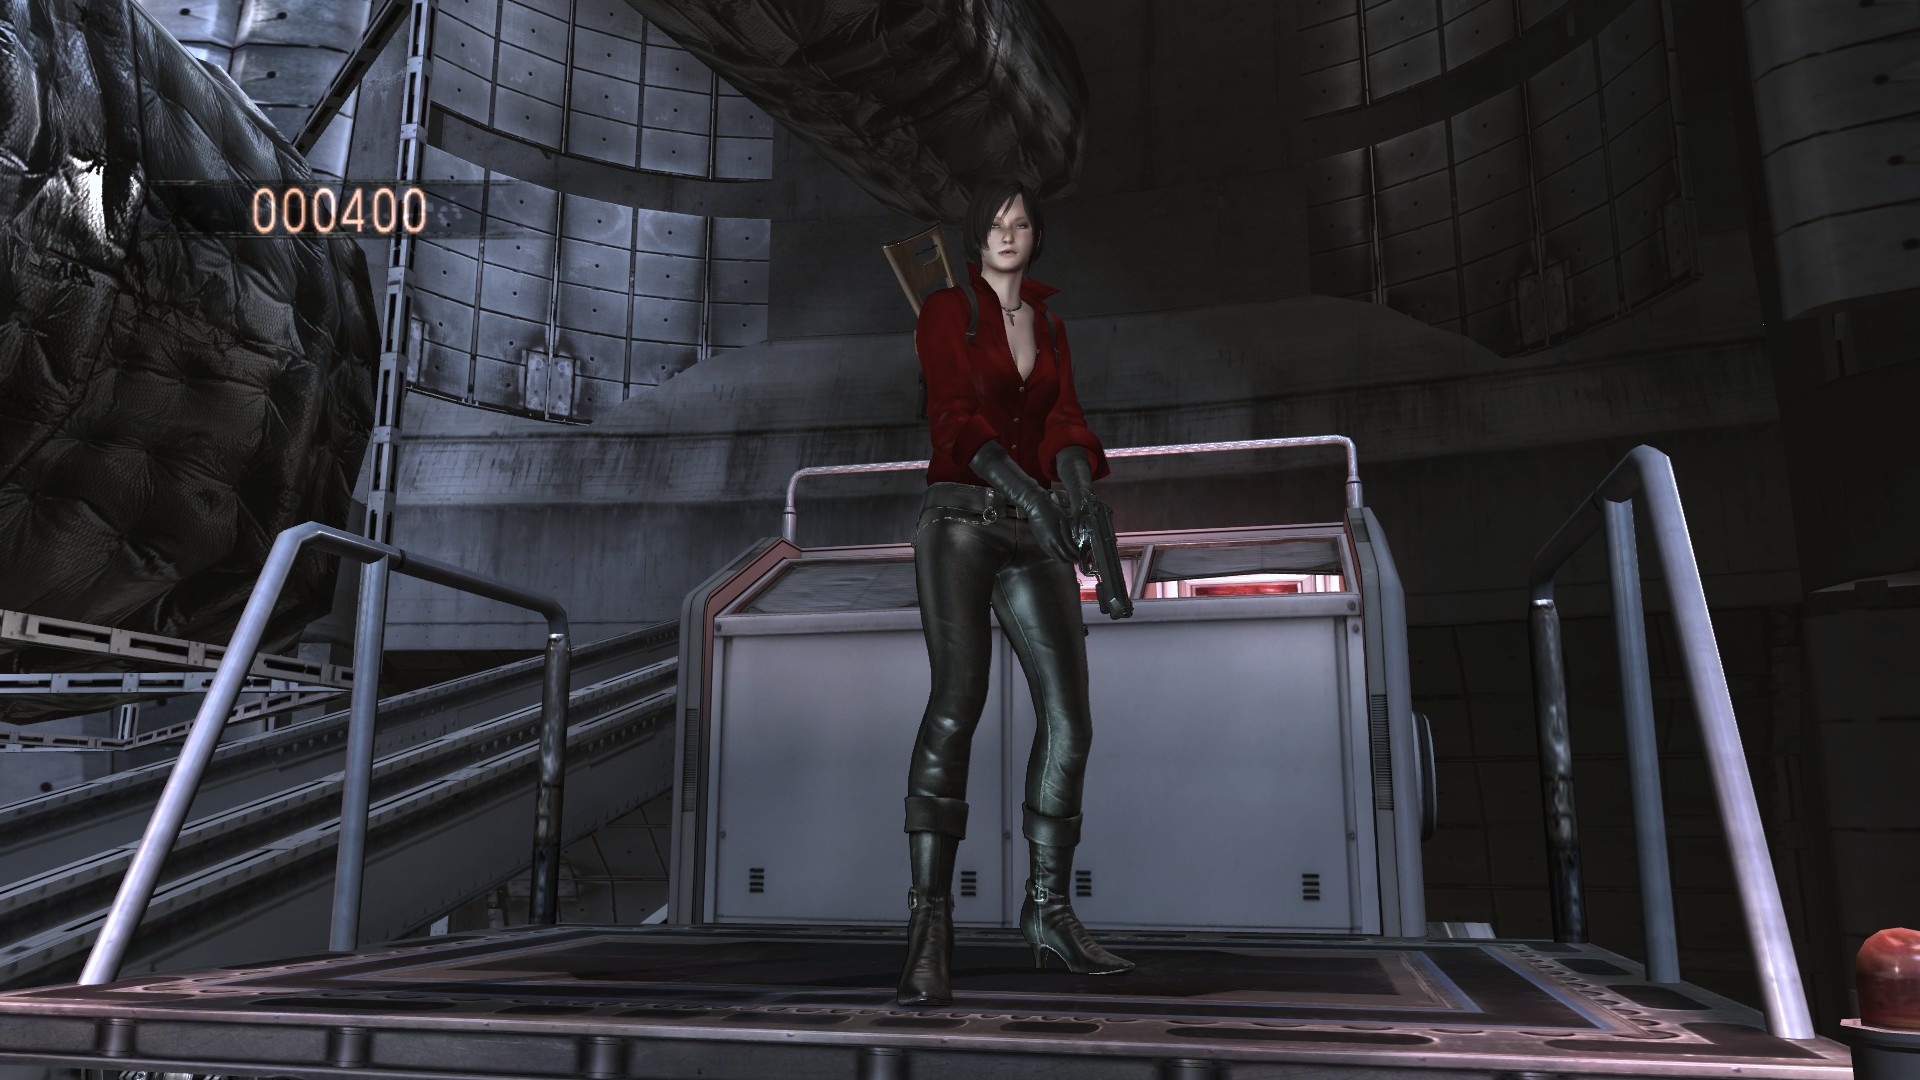 Resident Evil 6 Ada Wong with Leather Mini Dress Gameplay PC Mod 